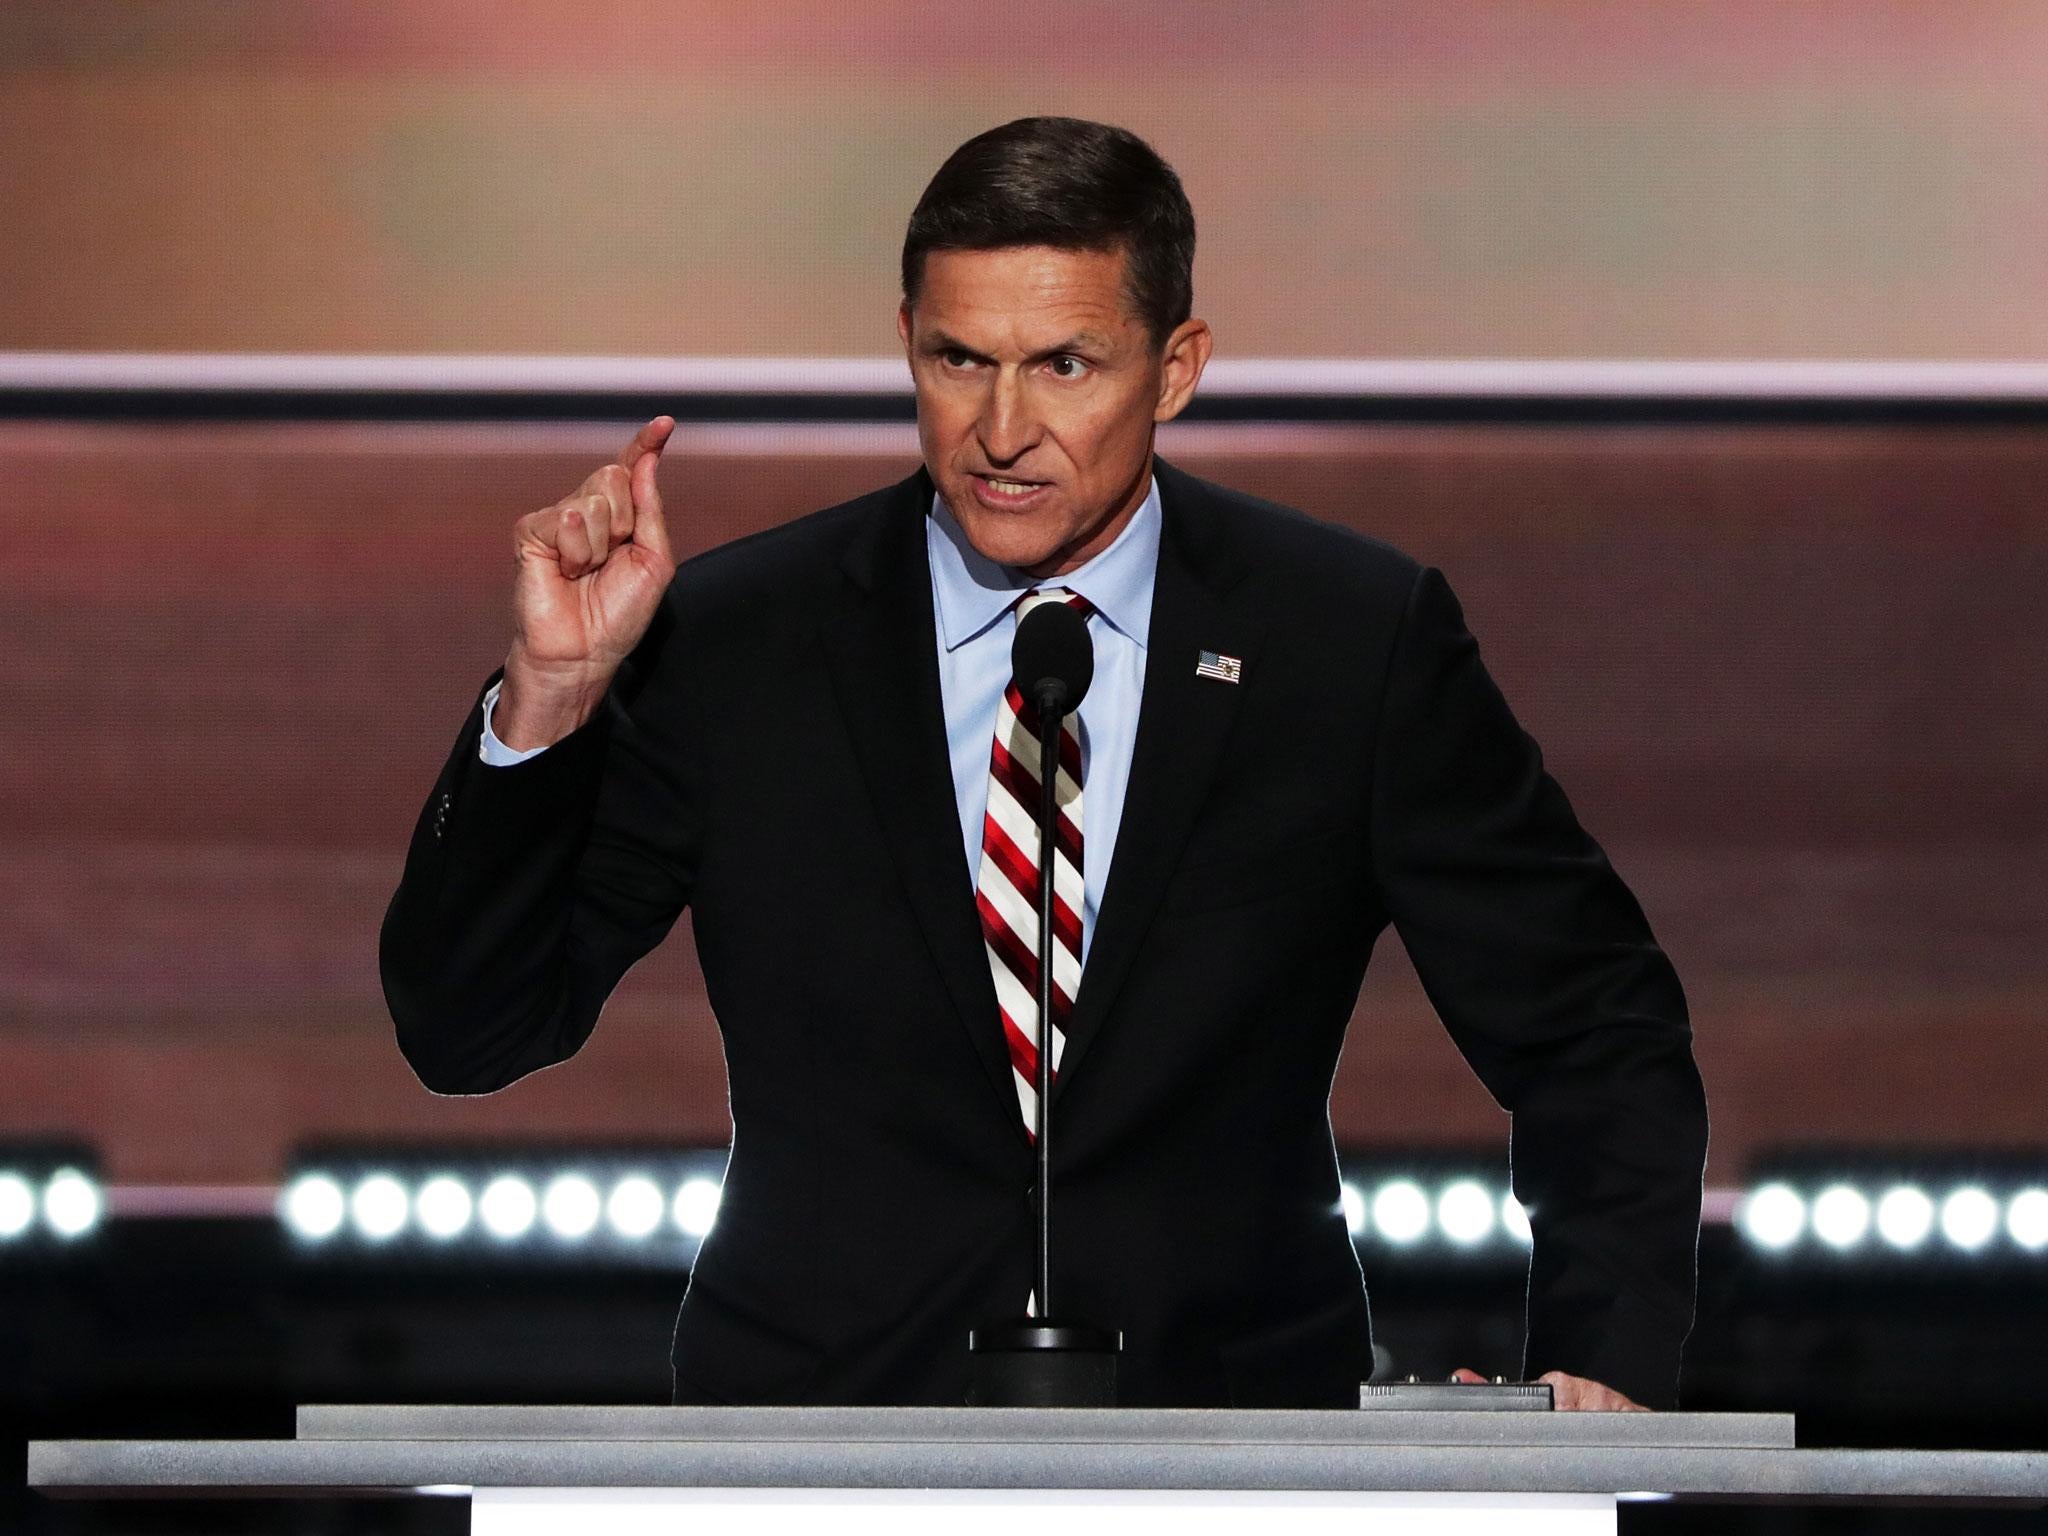 Gen Flynn delivered a speech for Trump at the Republican National Convention Alex Wong/Getty